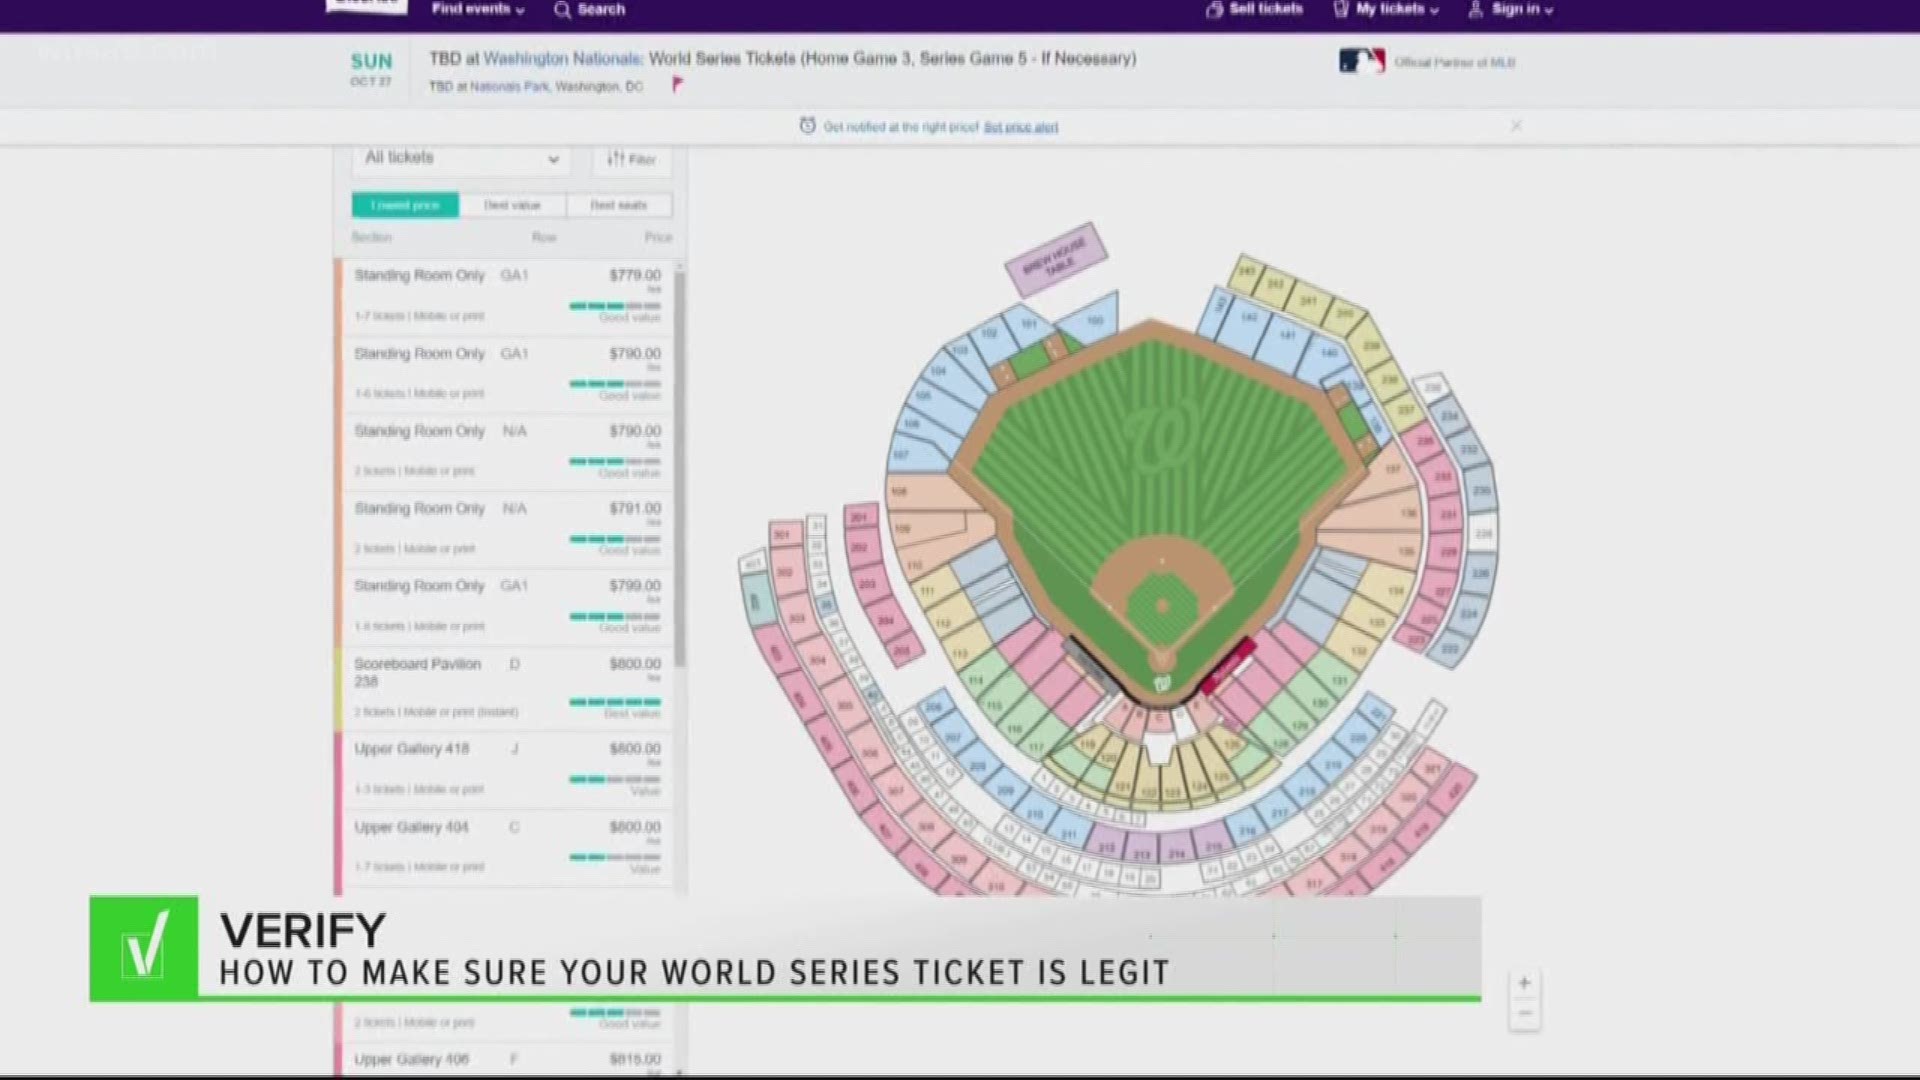 When it comes to purchasing tickets, how can you Verify a World Series ticket is actually the real deal?